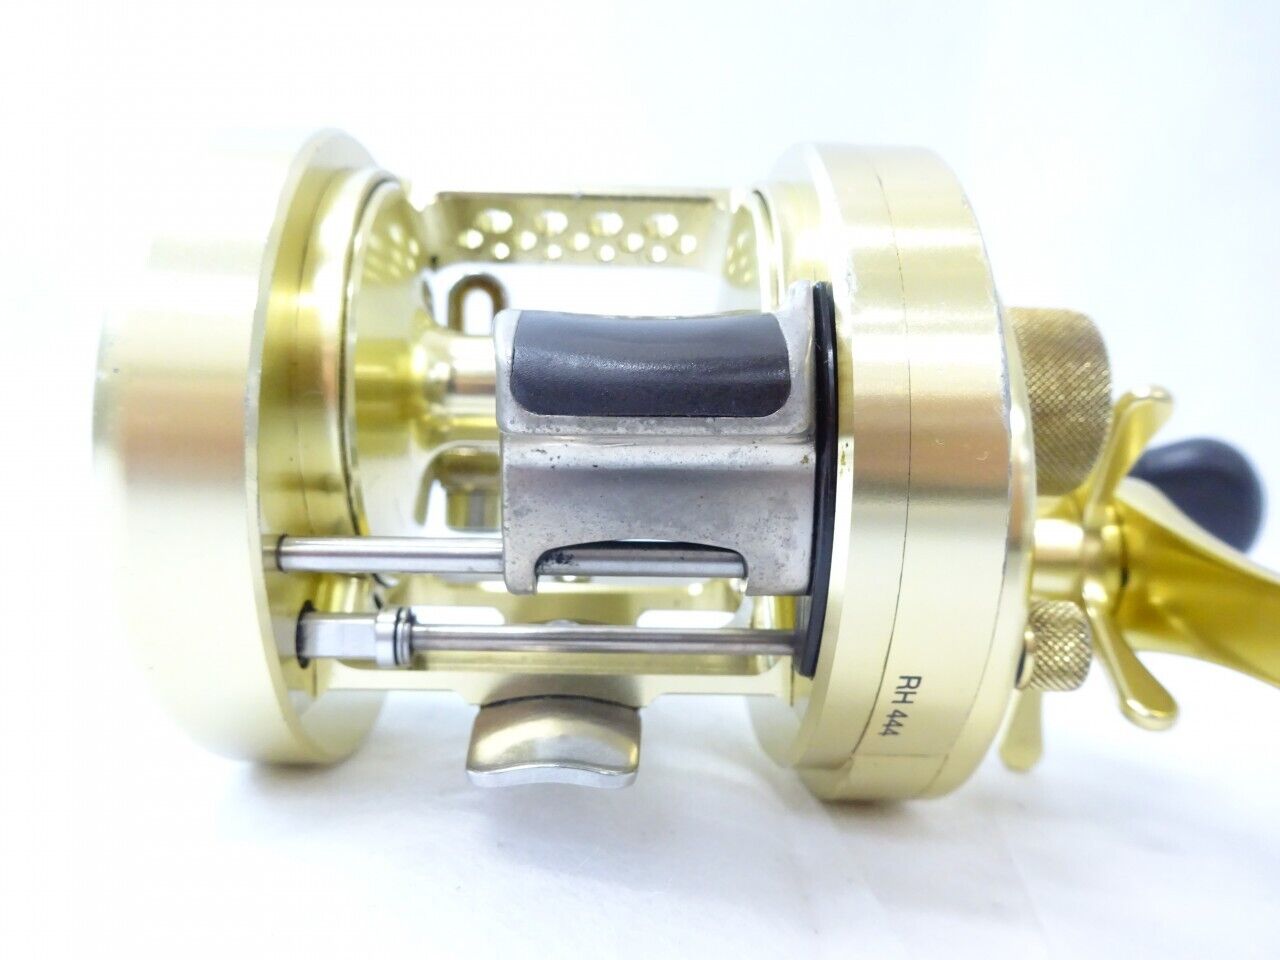 Shimano 01 CALCUTTA CONQUEST 400 Right Handle Bait Casting Reel F/S from Japan